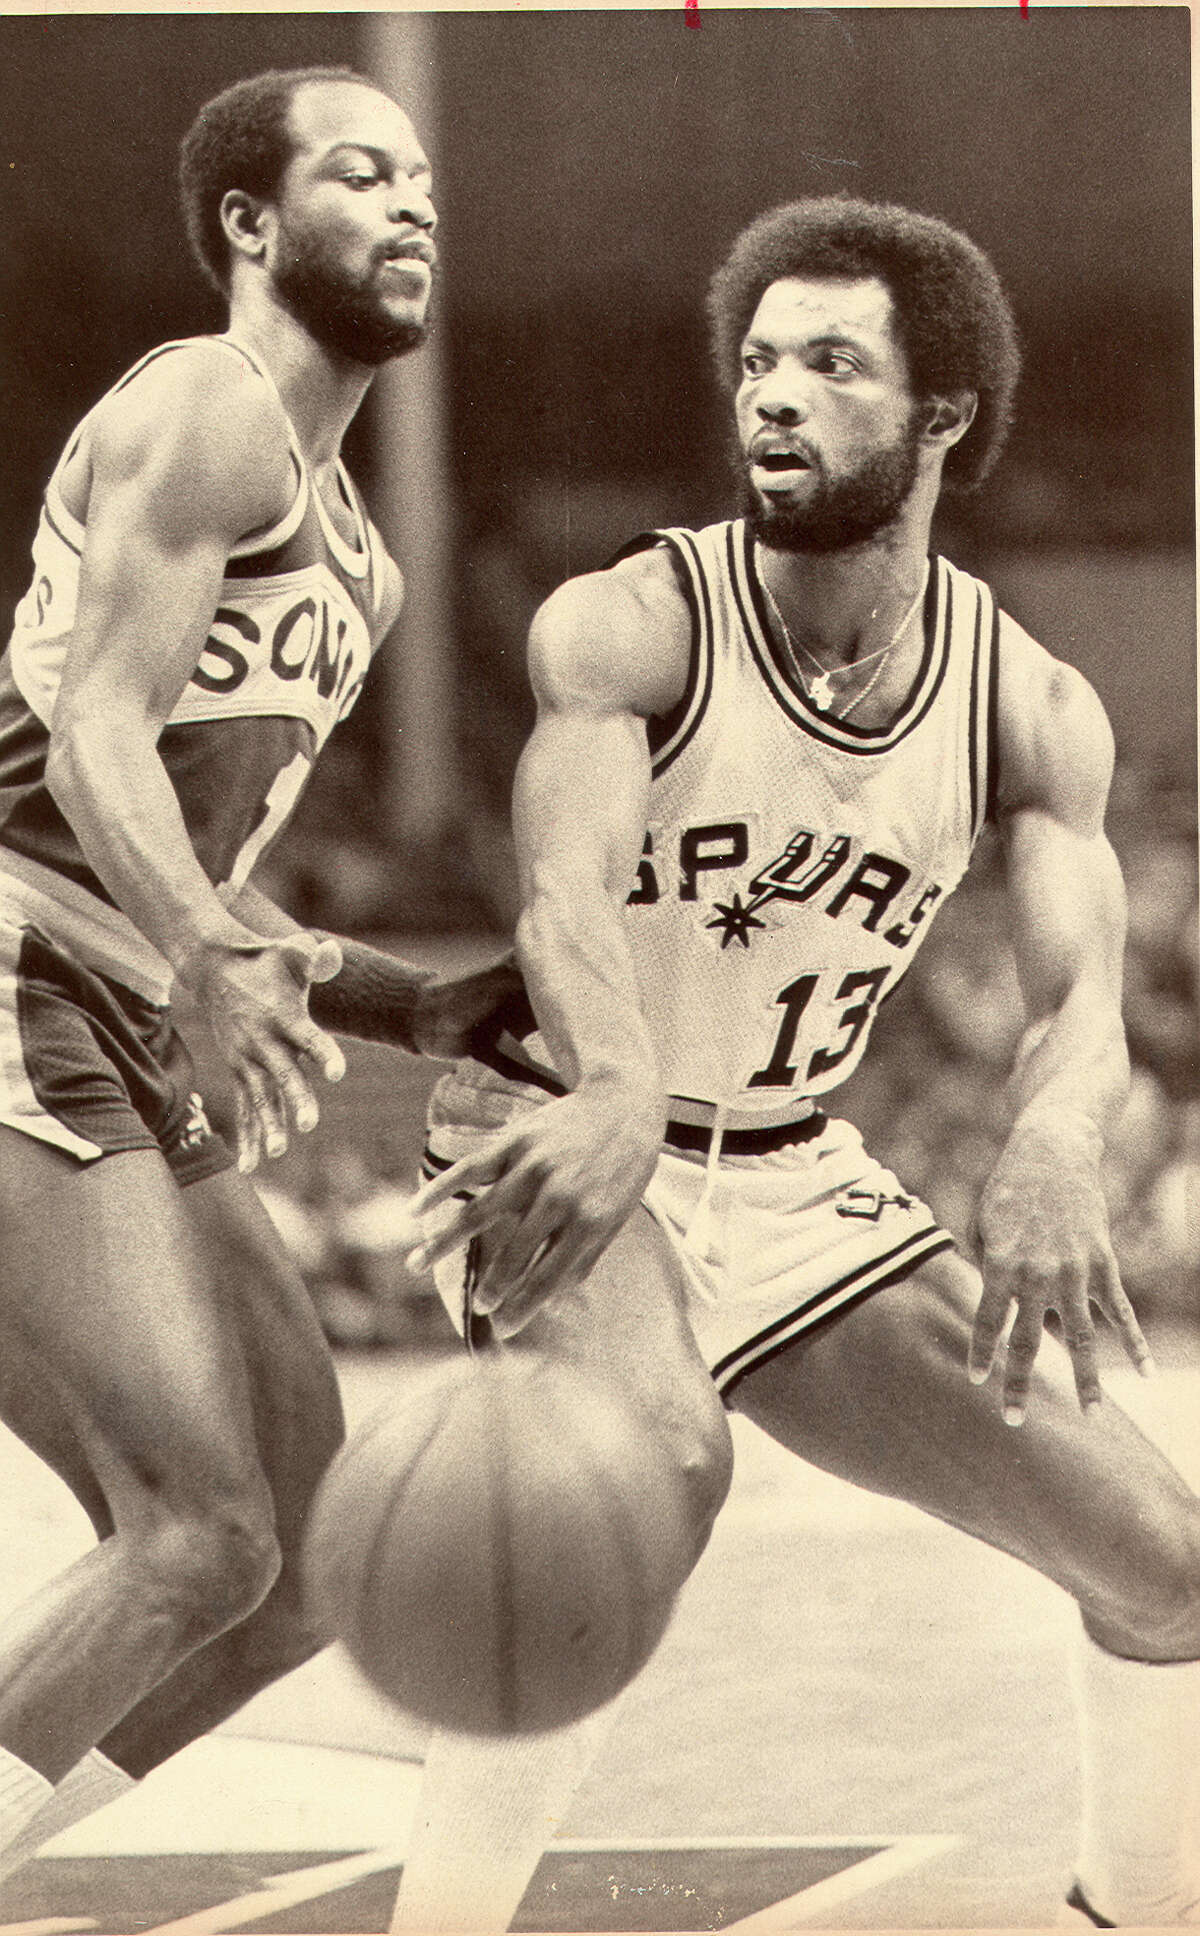 James Silas of the Spurs makes a pass around Seattle’s Gus Johnson during a late 1970s game at HemisFair Arena.